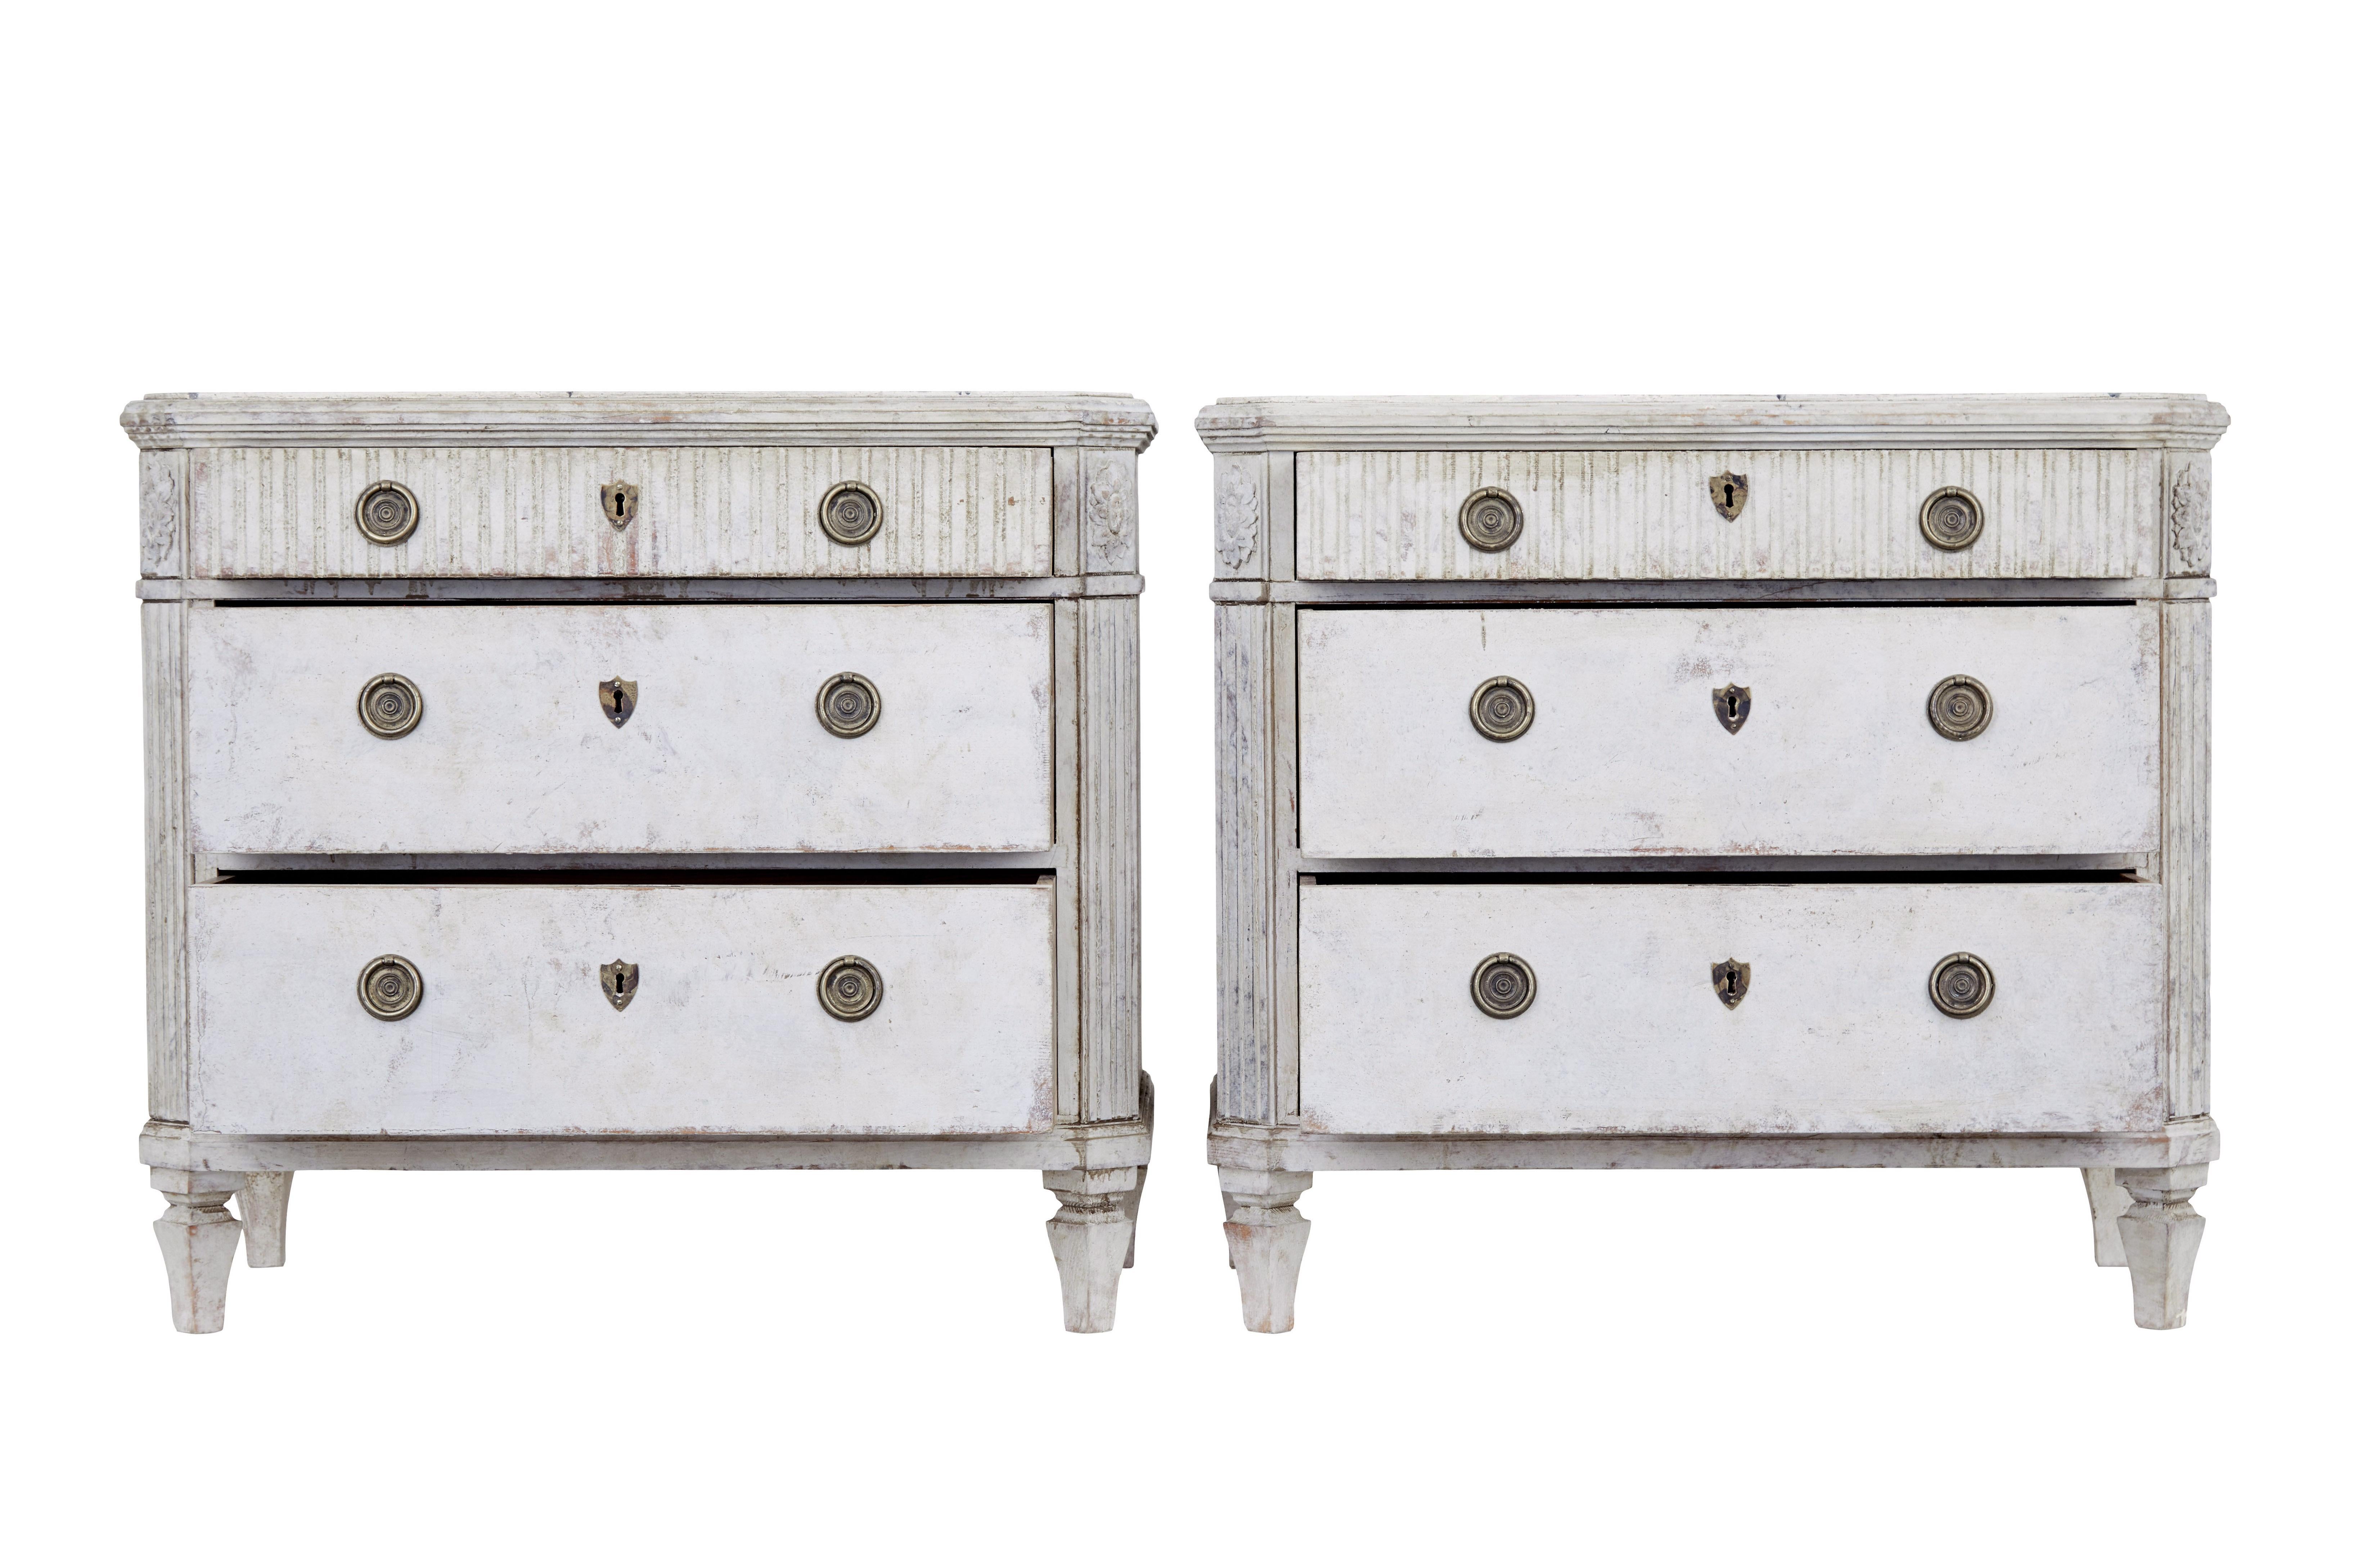 Pair of 19th century painted chest of drawers circa 1880.

Good quality pair of gustavian influenced pair of commodes.  Shaped top surfaces with faux marble hand painted detailing.   Each chest is fitted with 3 drawers and later brass ring handles